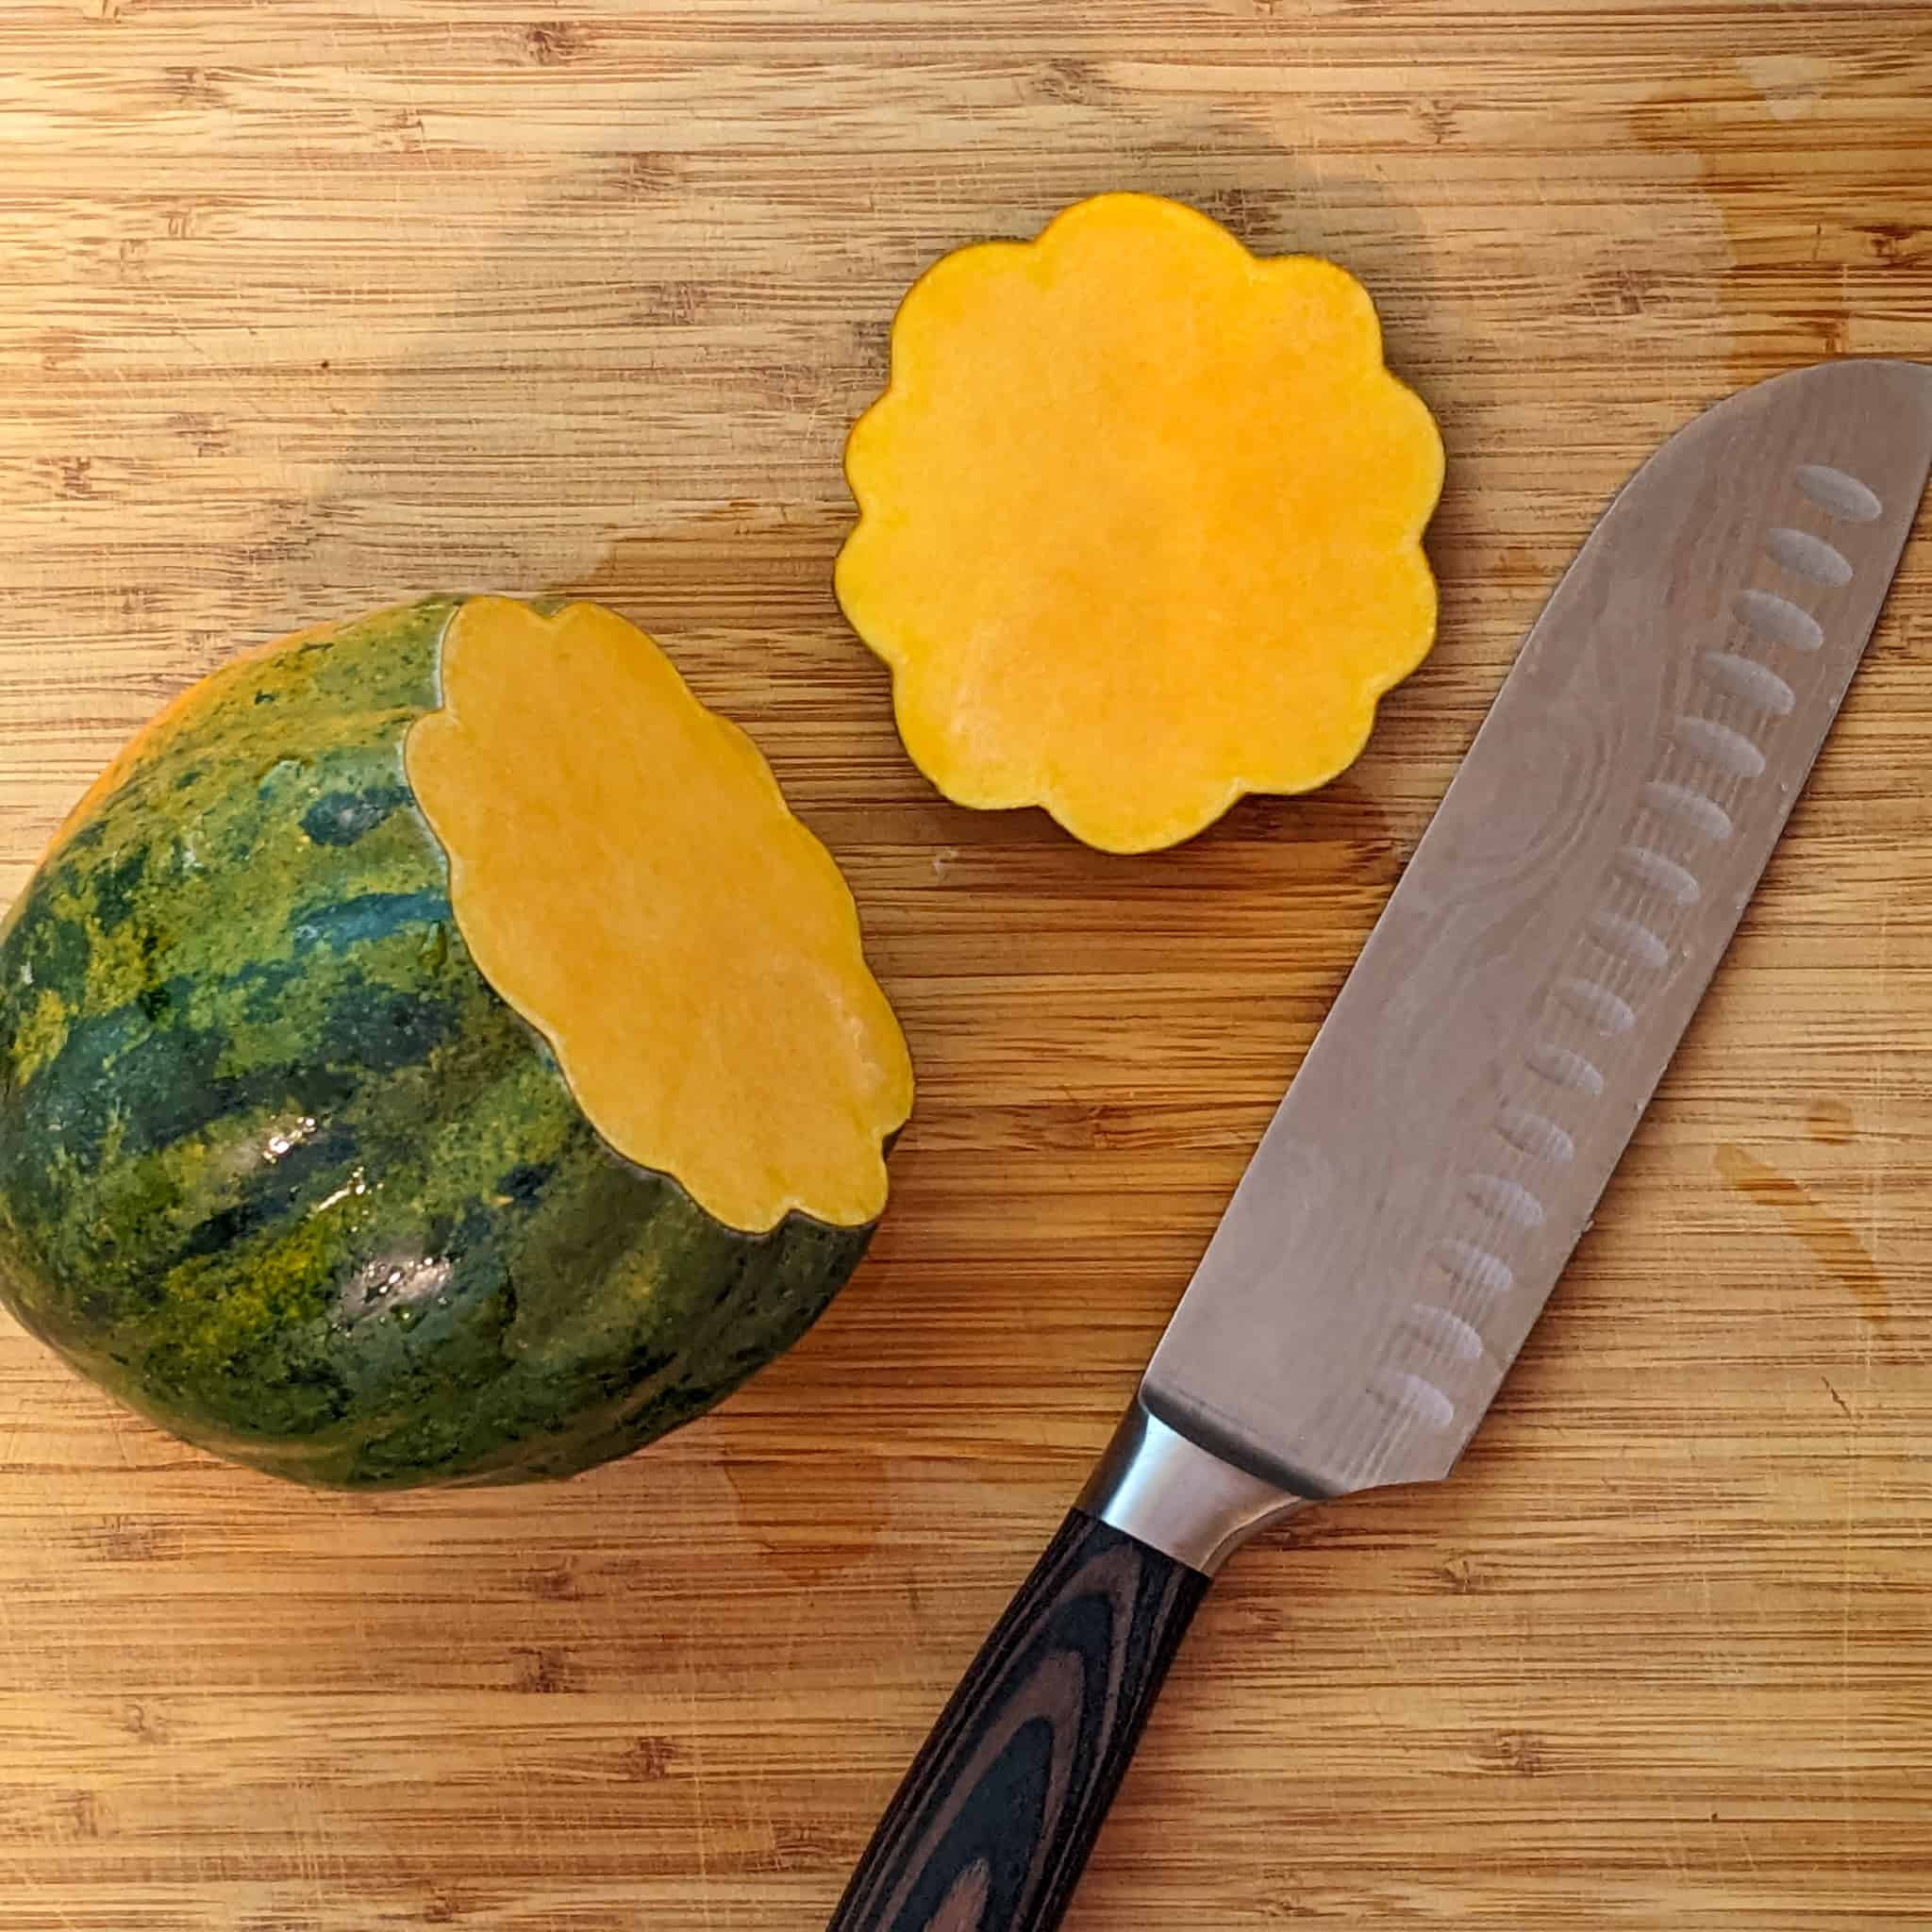 tip of the acorn squash sliced off  with both resting on the cutting board next to a santoku knife